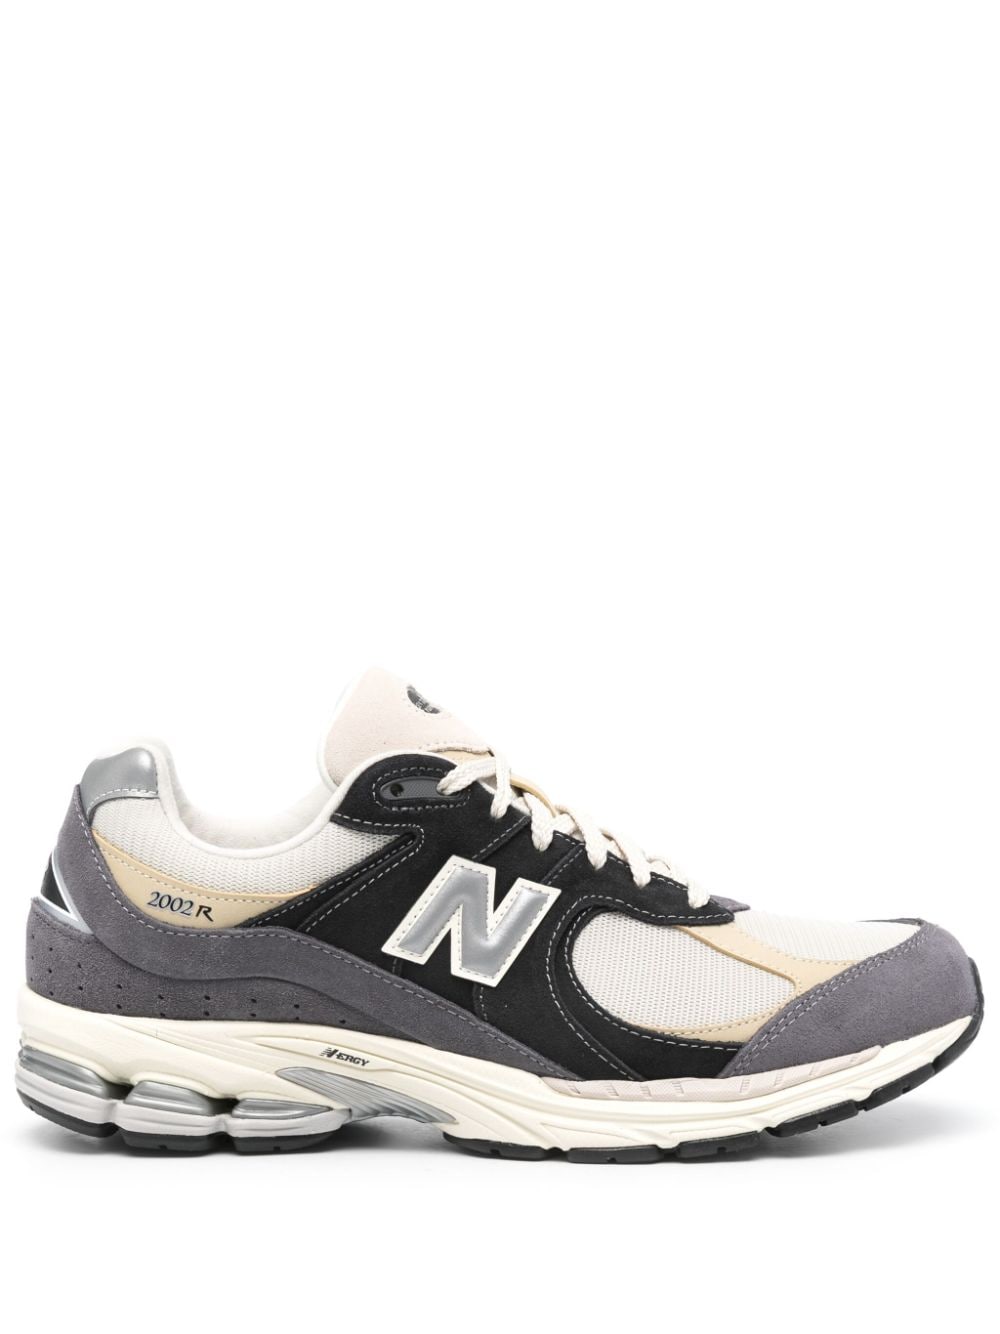 New Balance 2002R suede sneakers - Neutrals